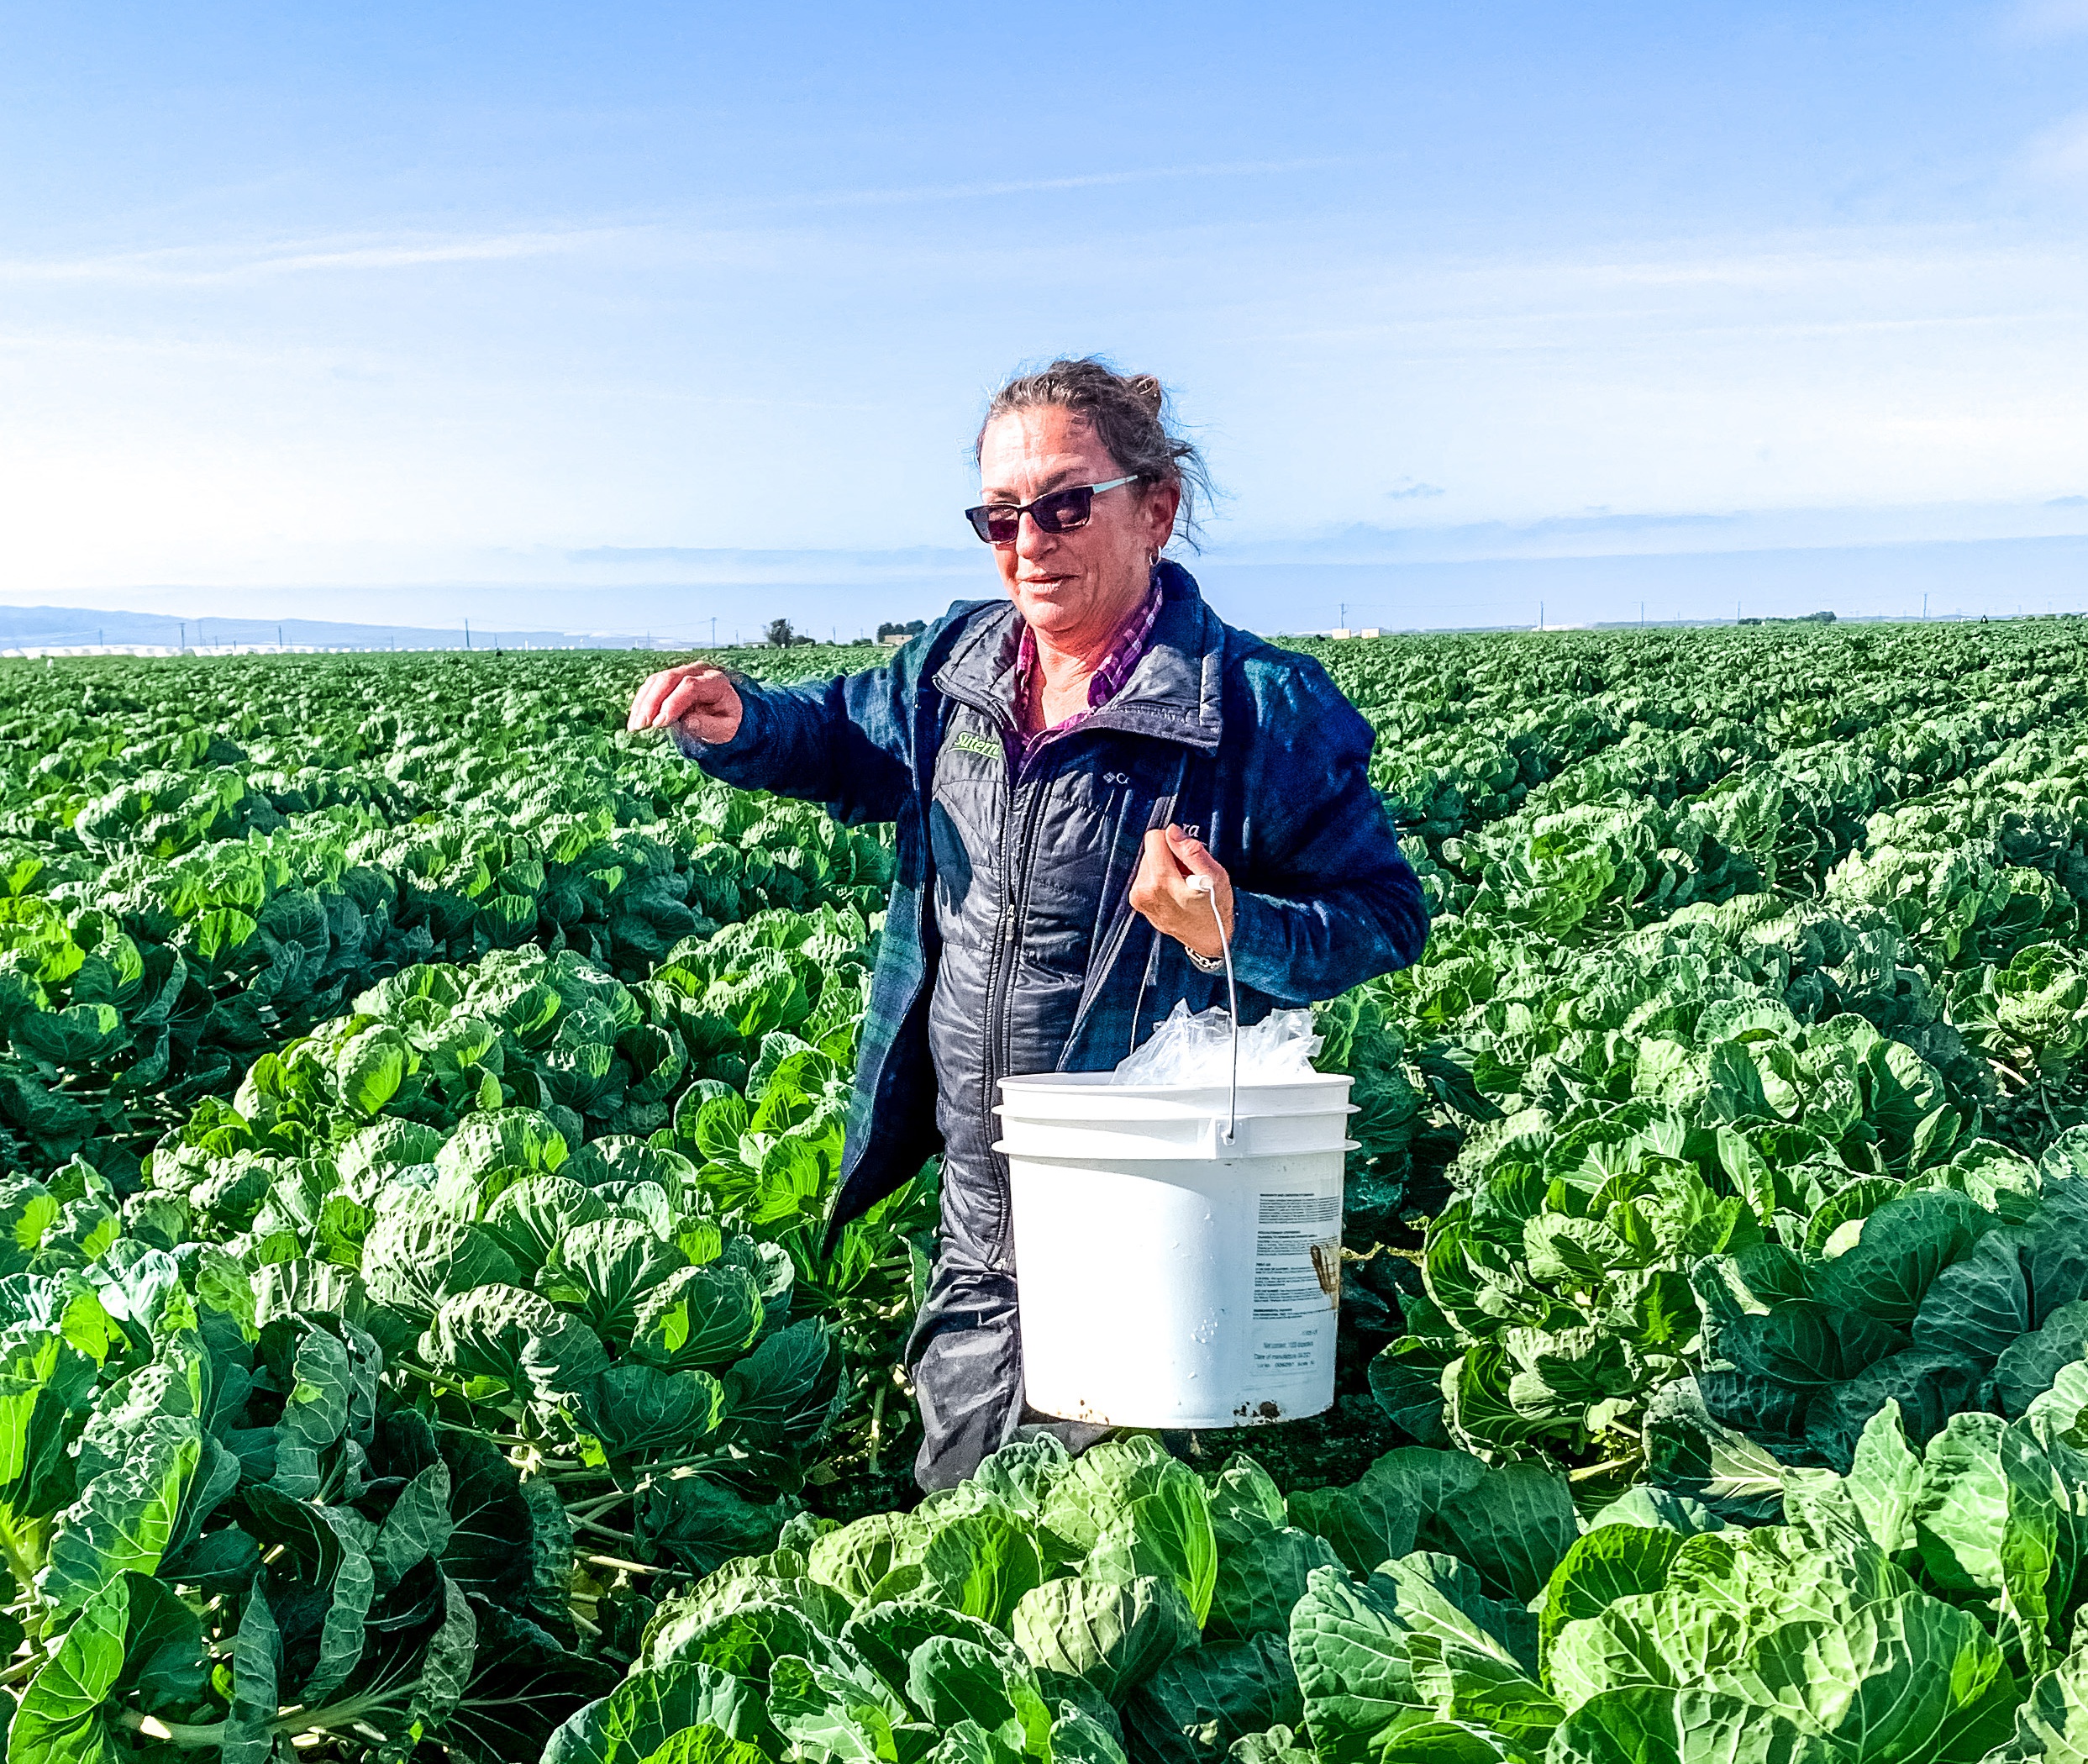 A Suterra Field Representative walks through a field of brussels sprouts with Suterra products.